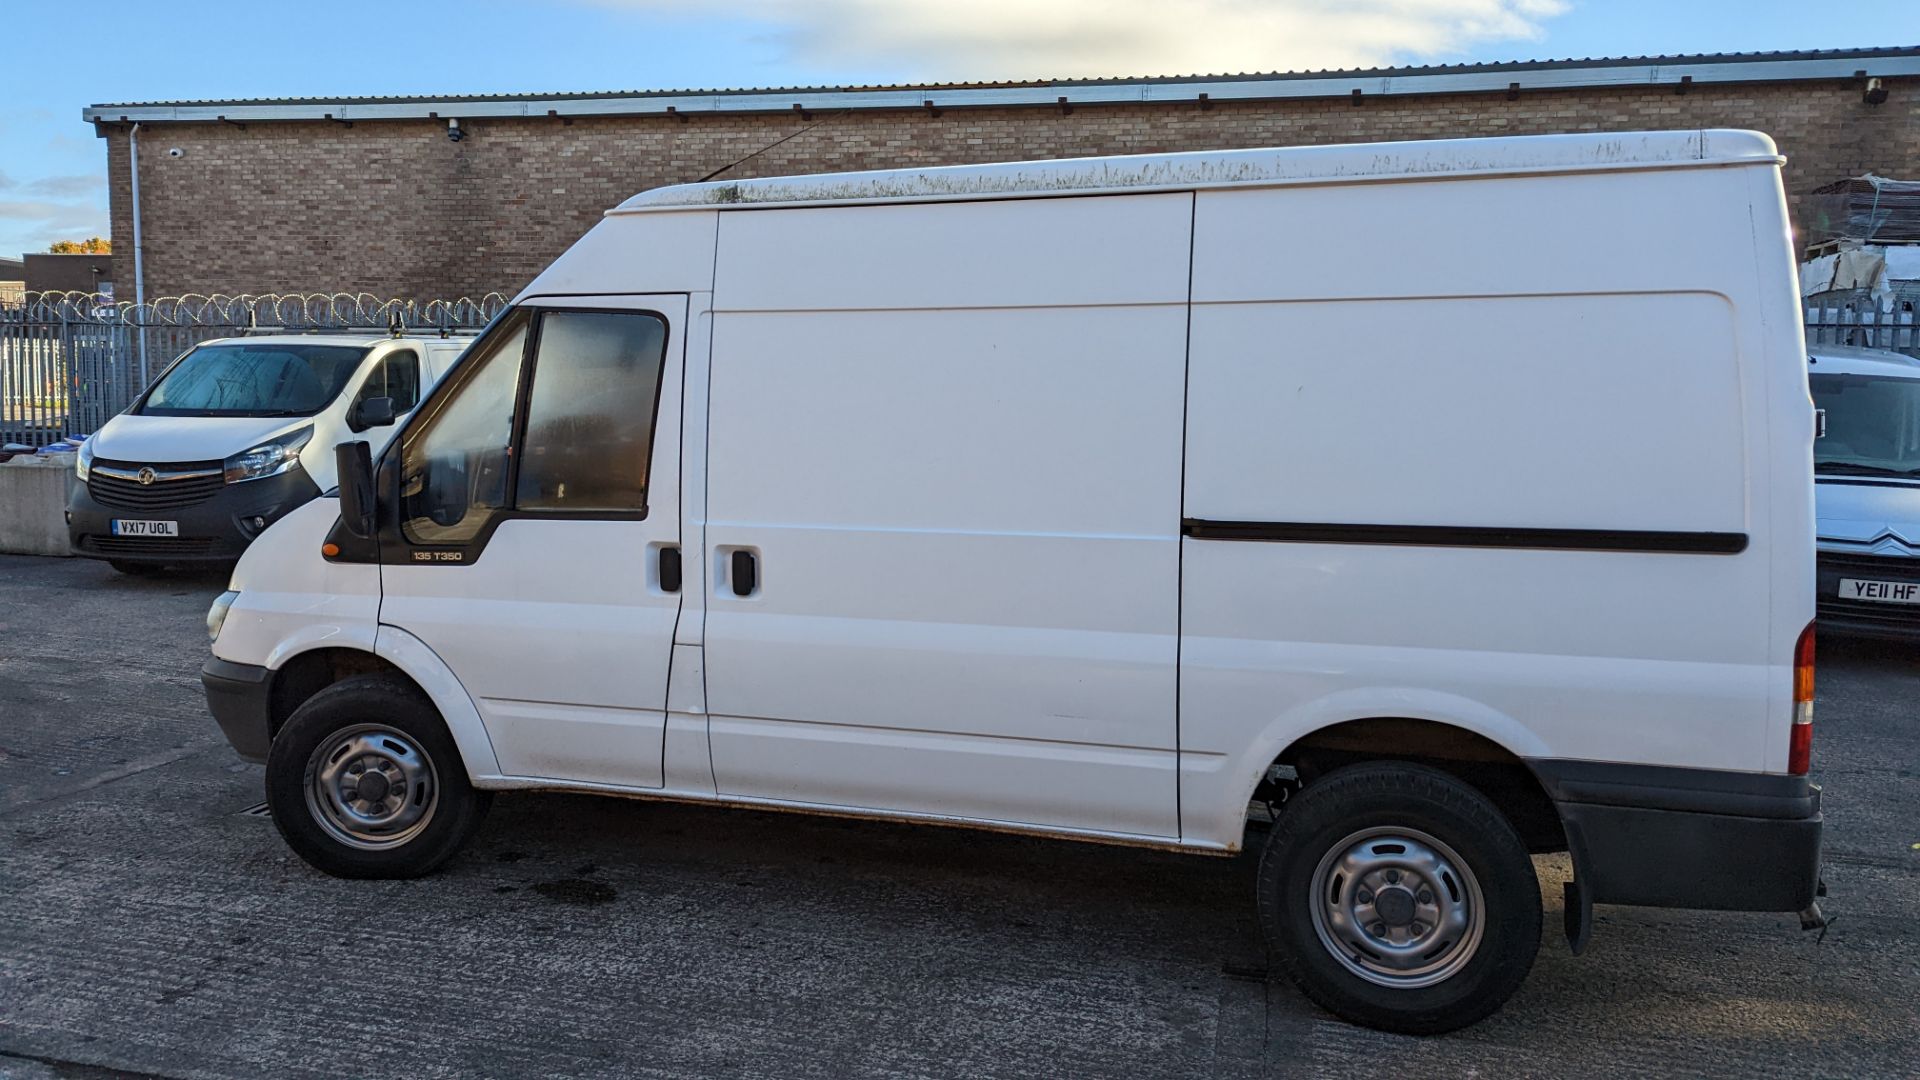 CU06 FBC Ford Transit panel van, 6 speed manual gearbox, 2402cc diesel engine. Colour: white. Fir - Image 18 of 44